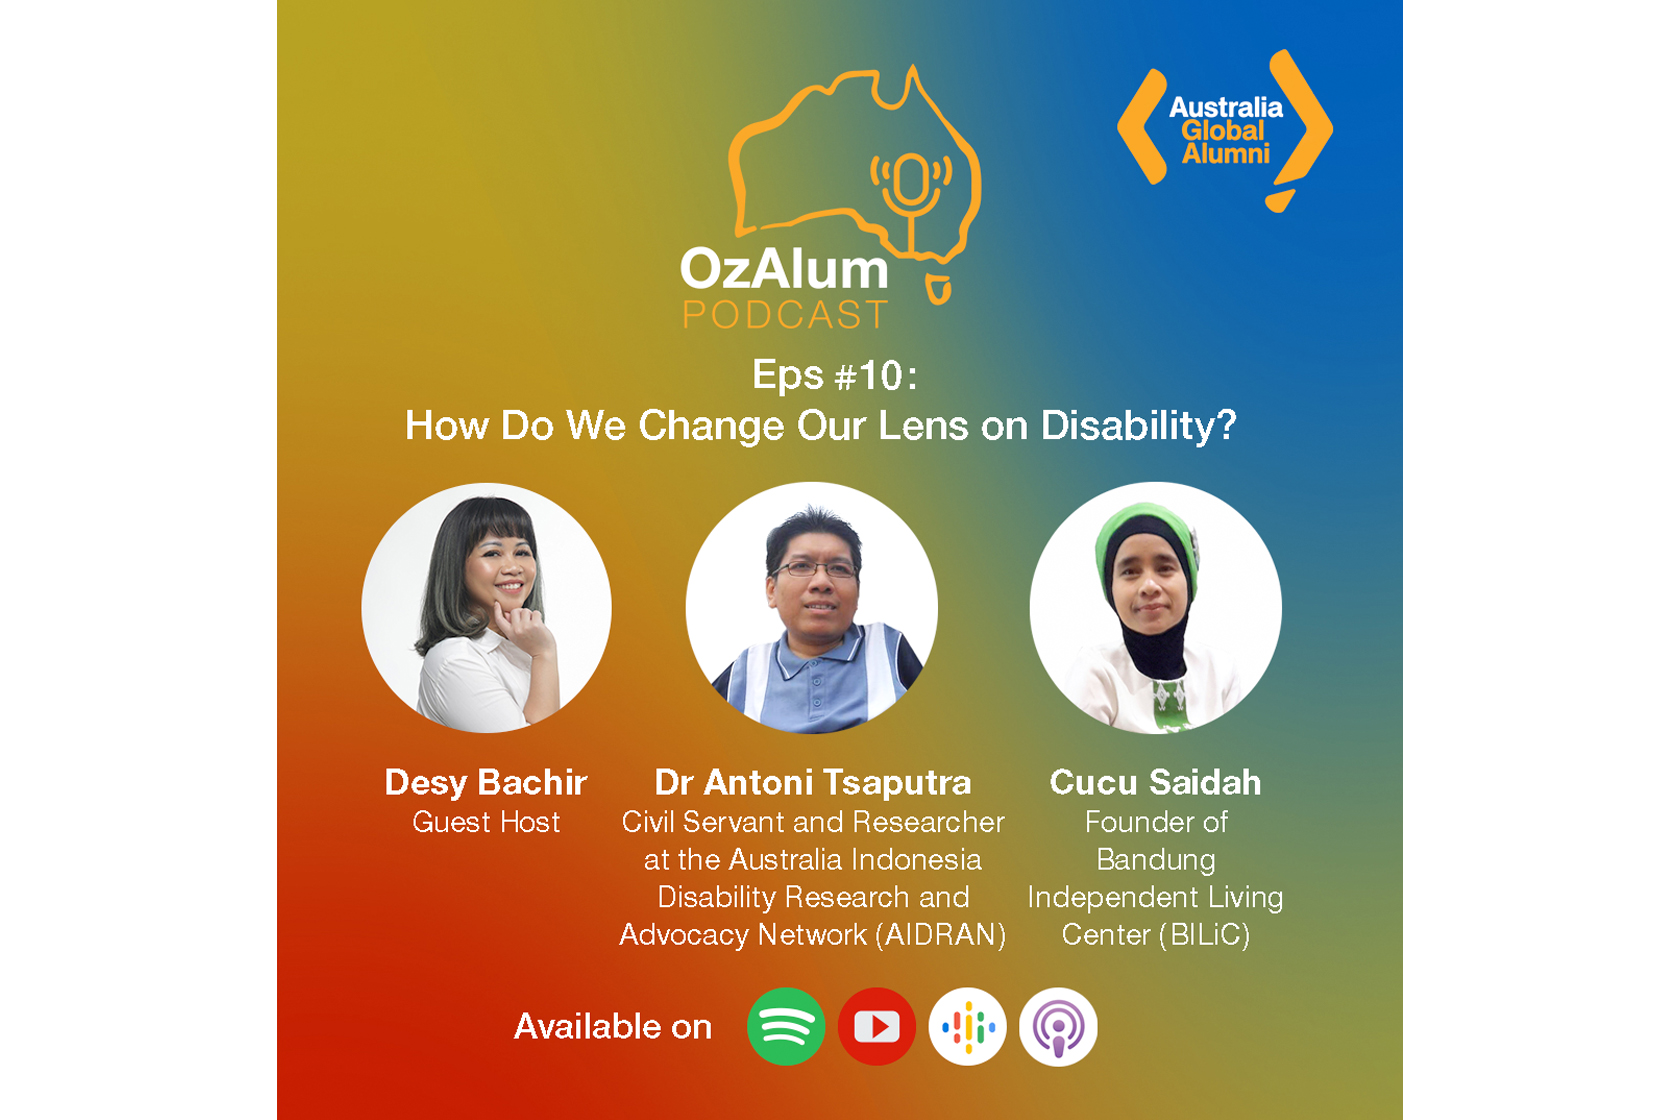 OzAlum Podcast Eps #10: How Do We Change Our Lens on Disability?